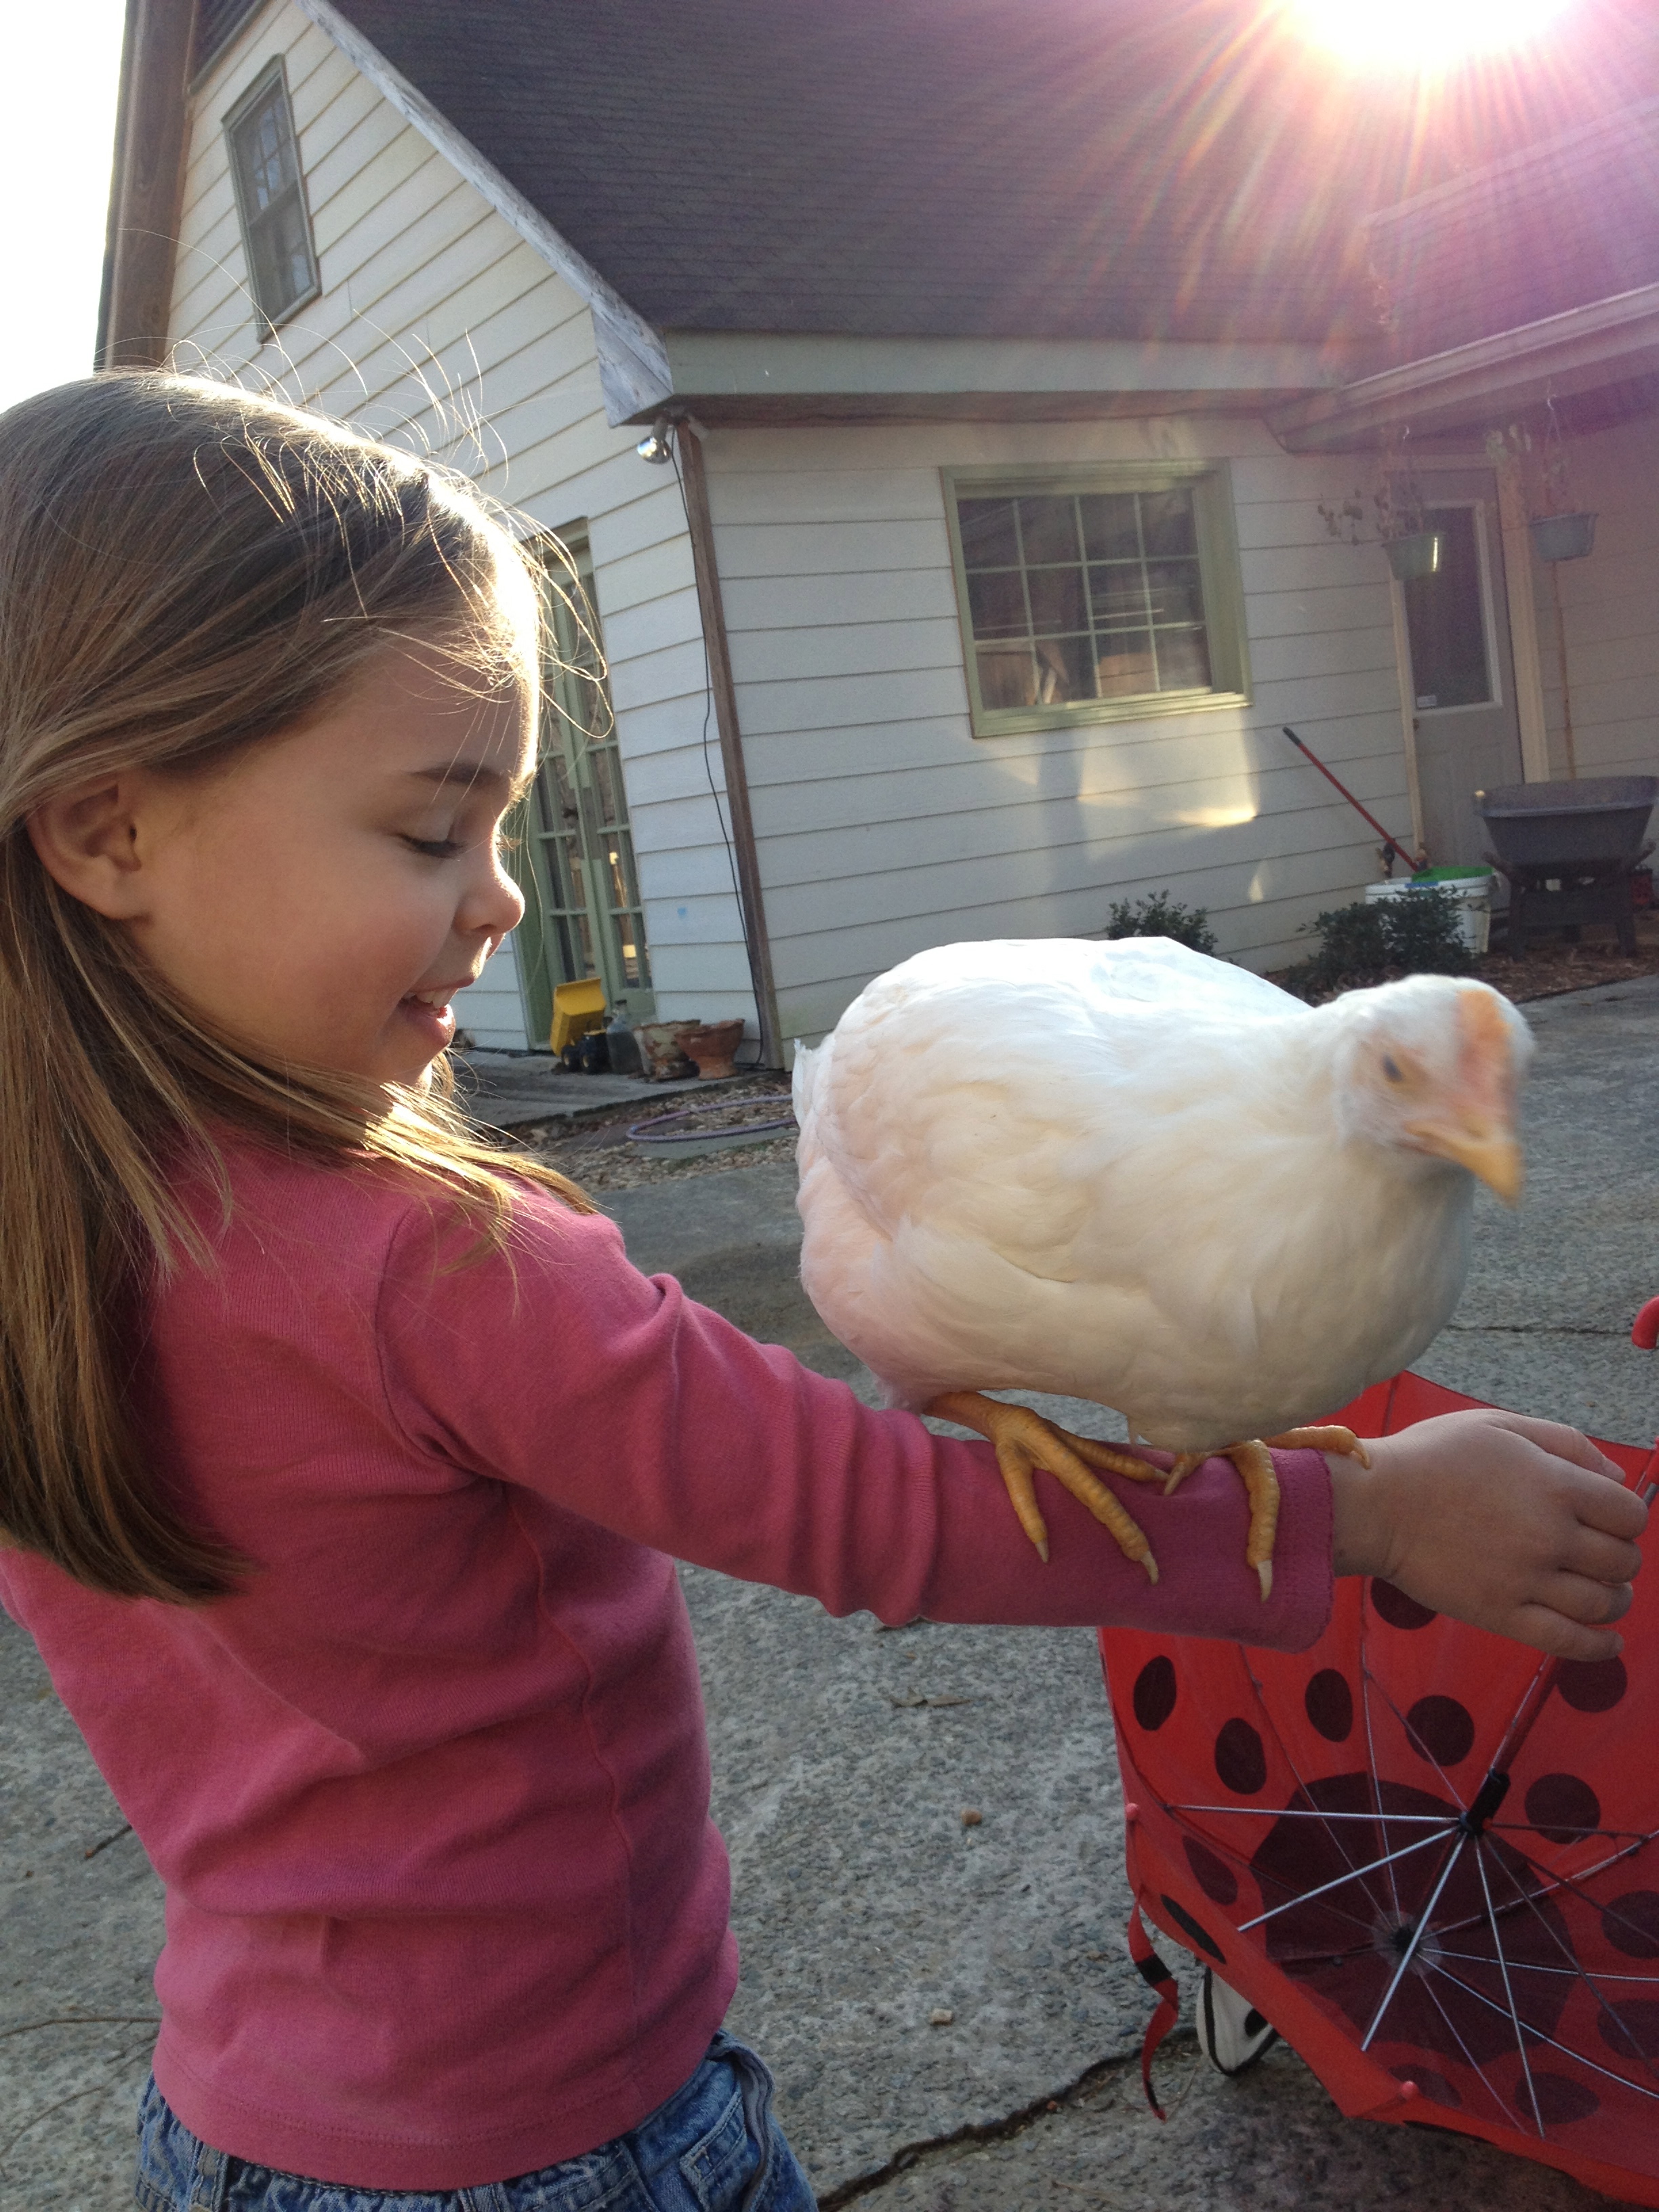 Our daughter Ella and very first hen, Nugget.  We think she is an Amber star.  Very sweet and friendly.